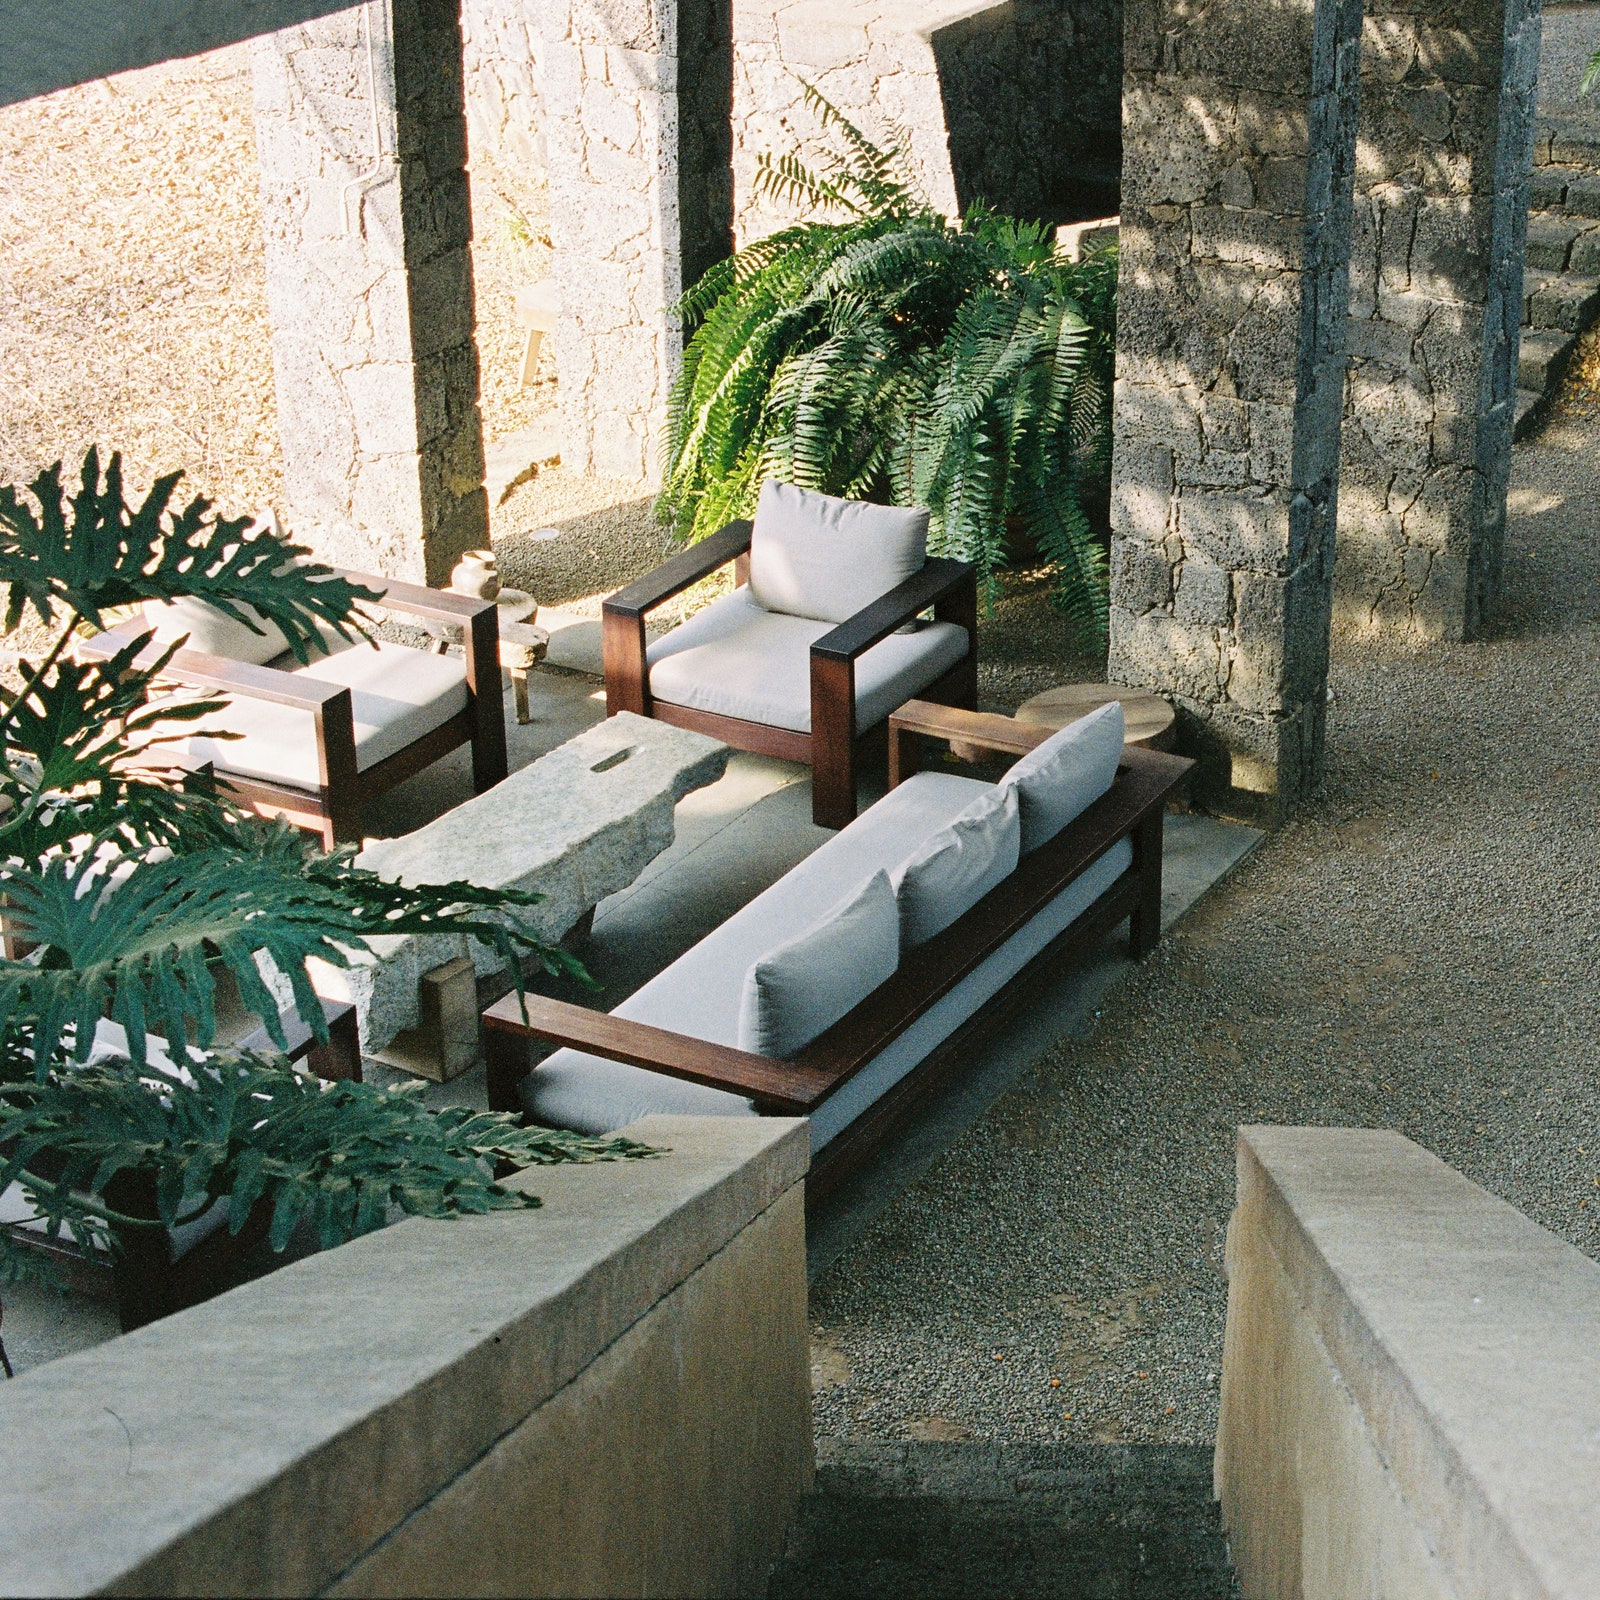 Patio Flagstone Furniture plants and Couch